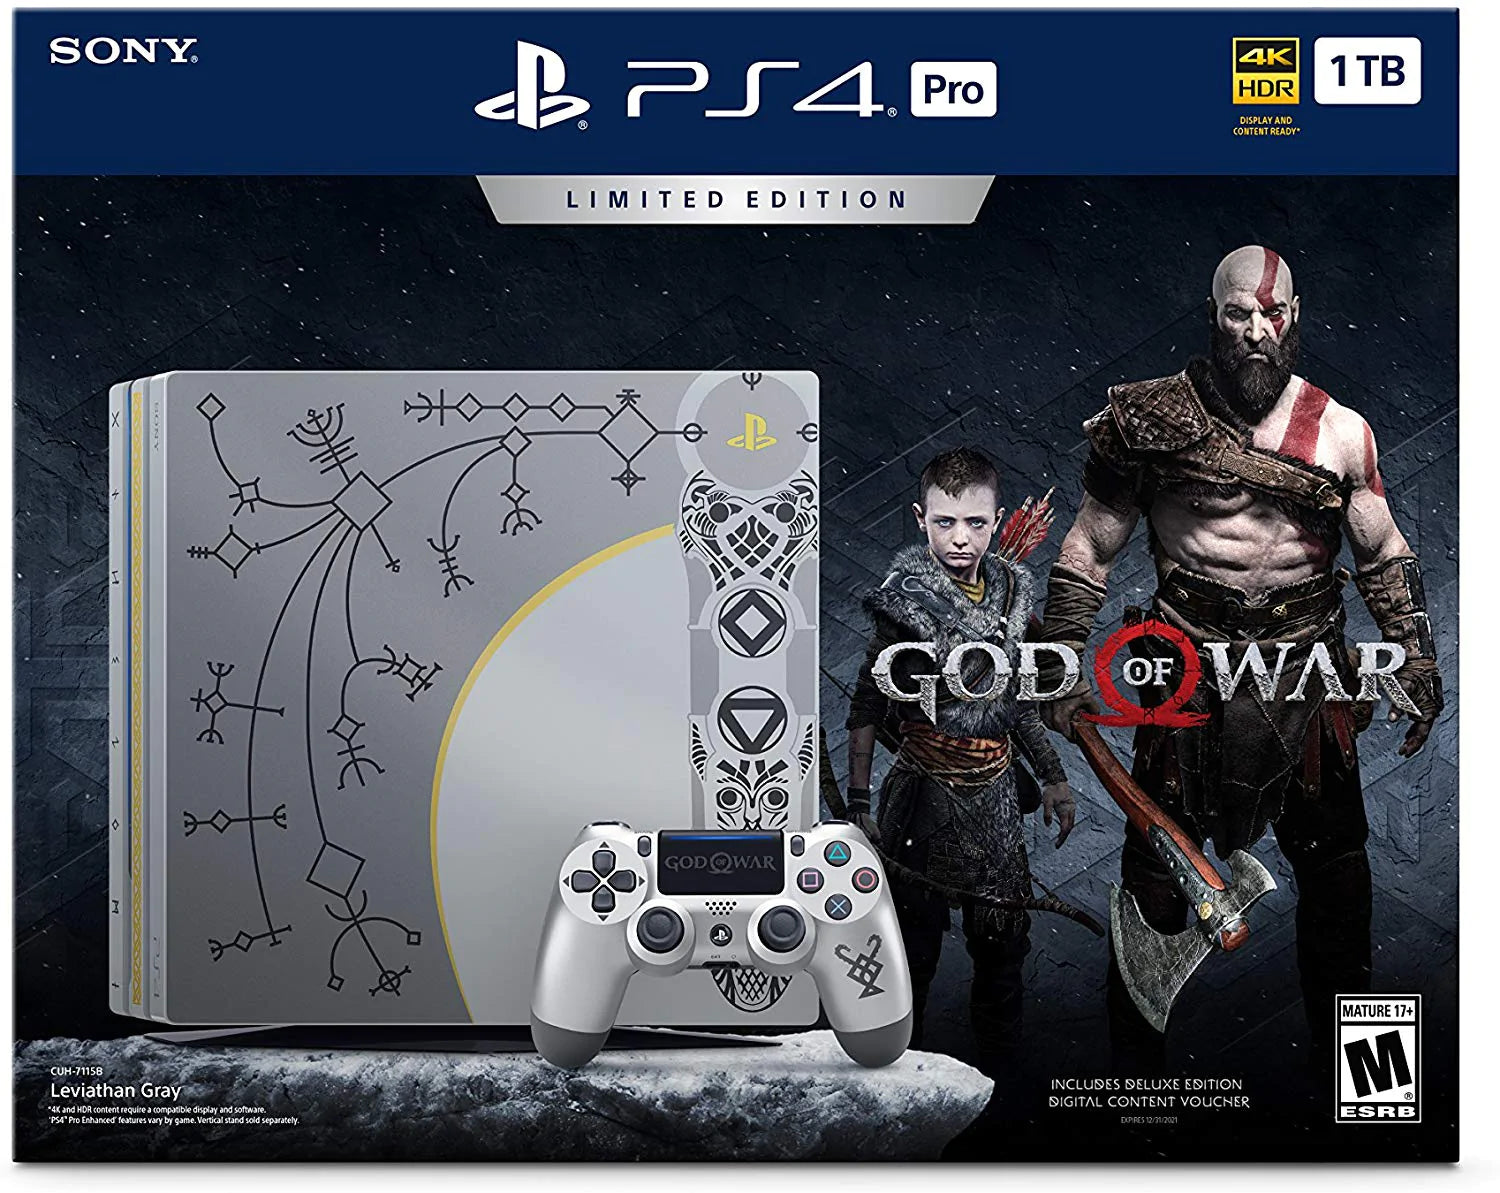 SONY PlayStation 4 Pro 1TB Limited Edition Console (God of War Bundle) - (PS4) Playstation 4 (US Version) [Pre-Owned] Consoles Sony   